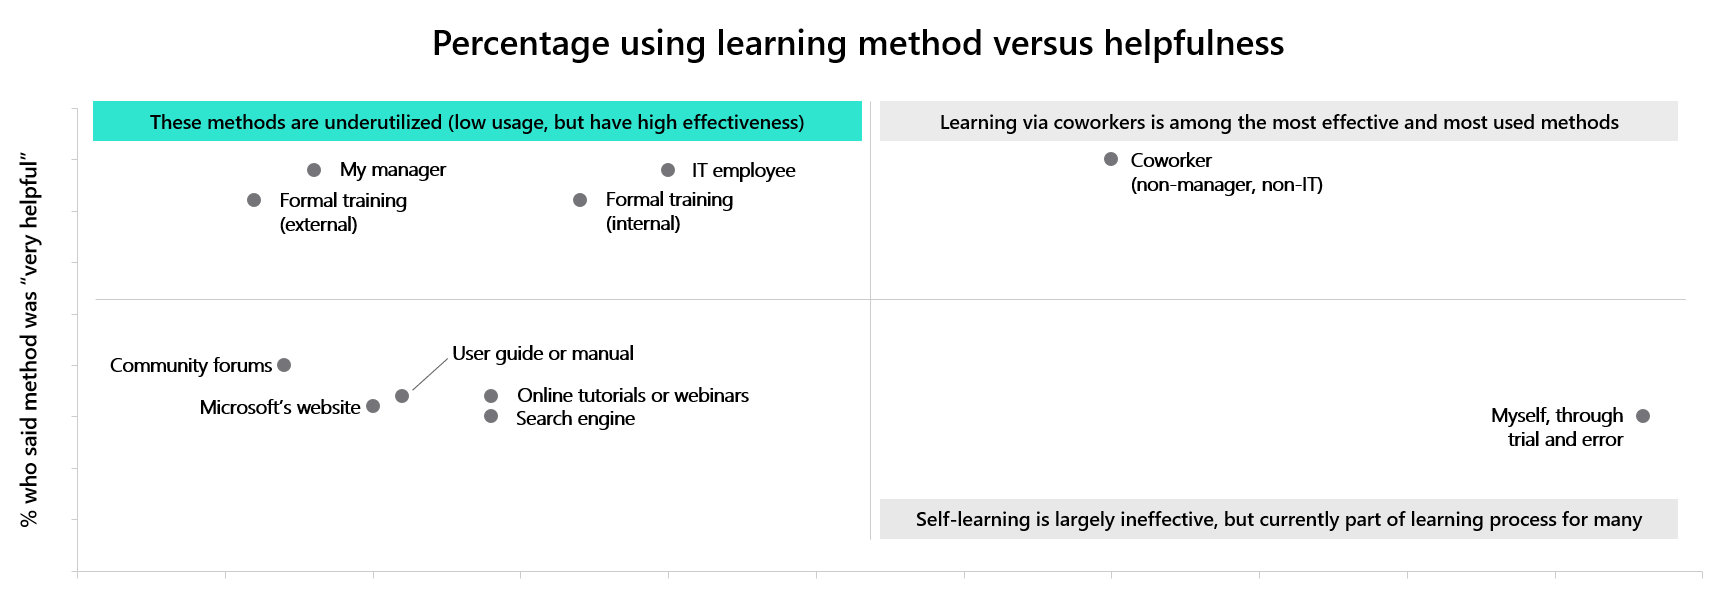 Learning methods and their effectiveness.